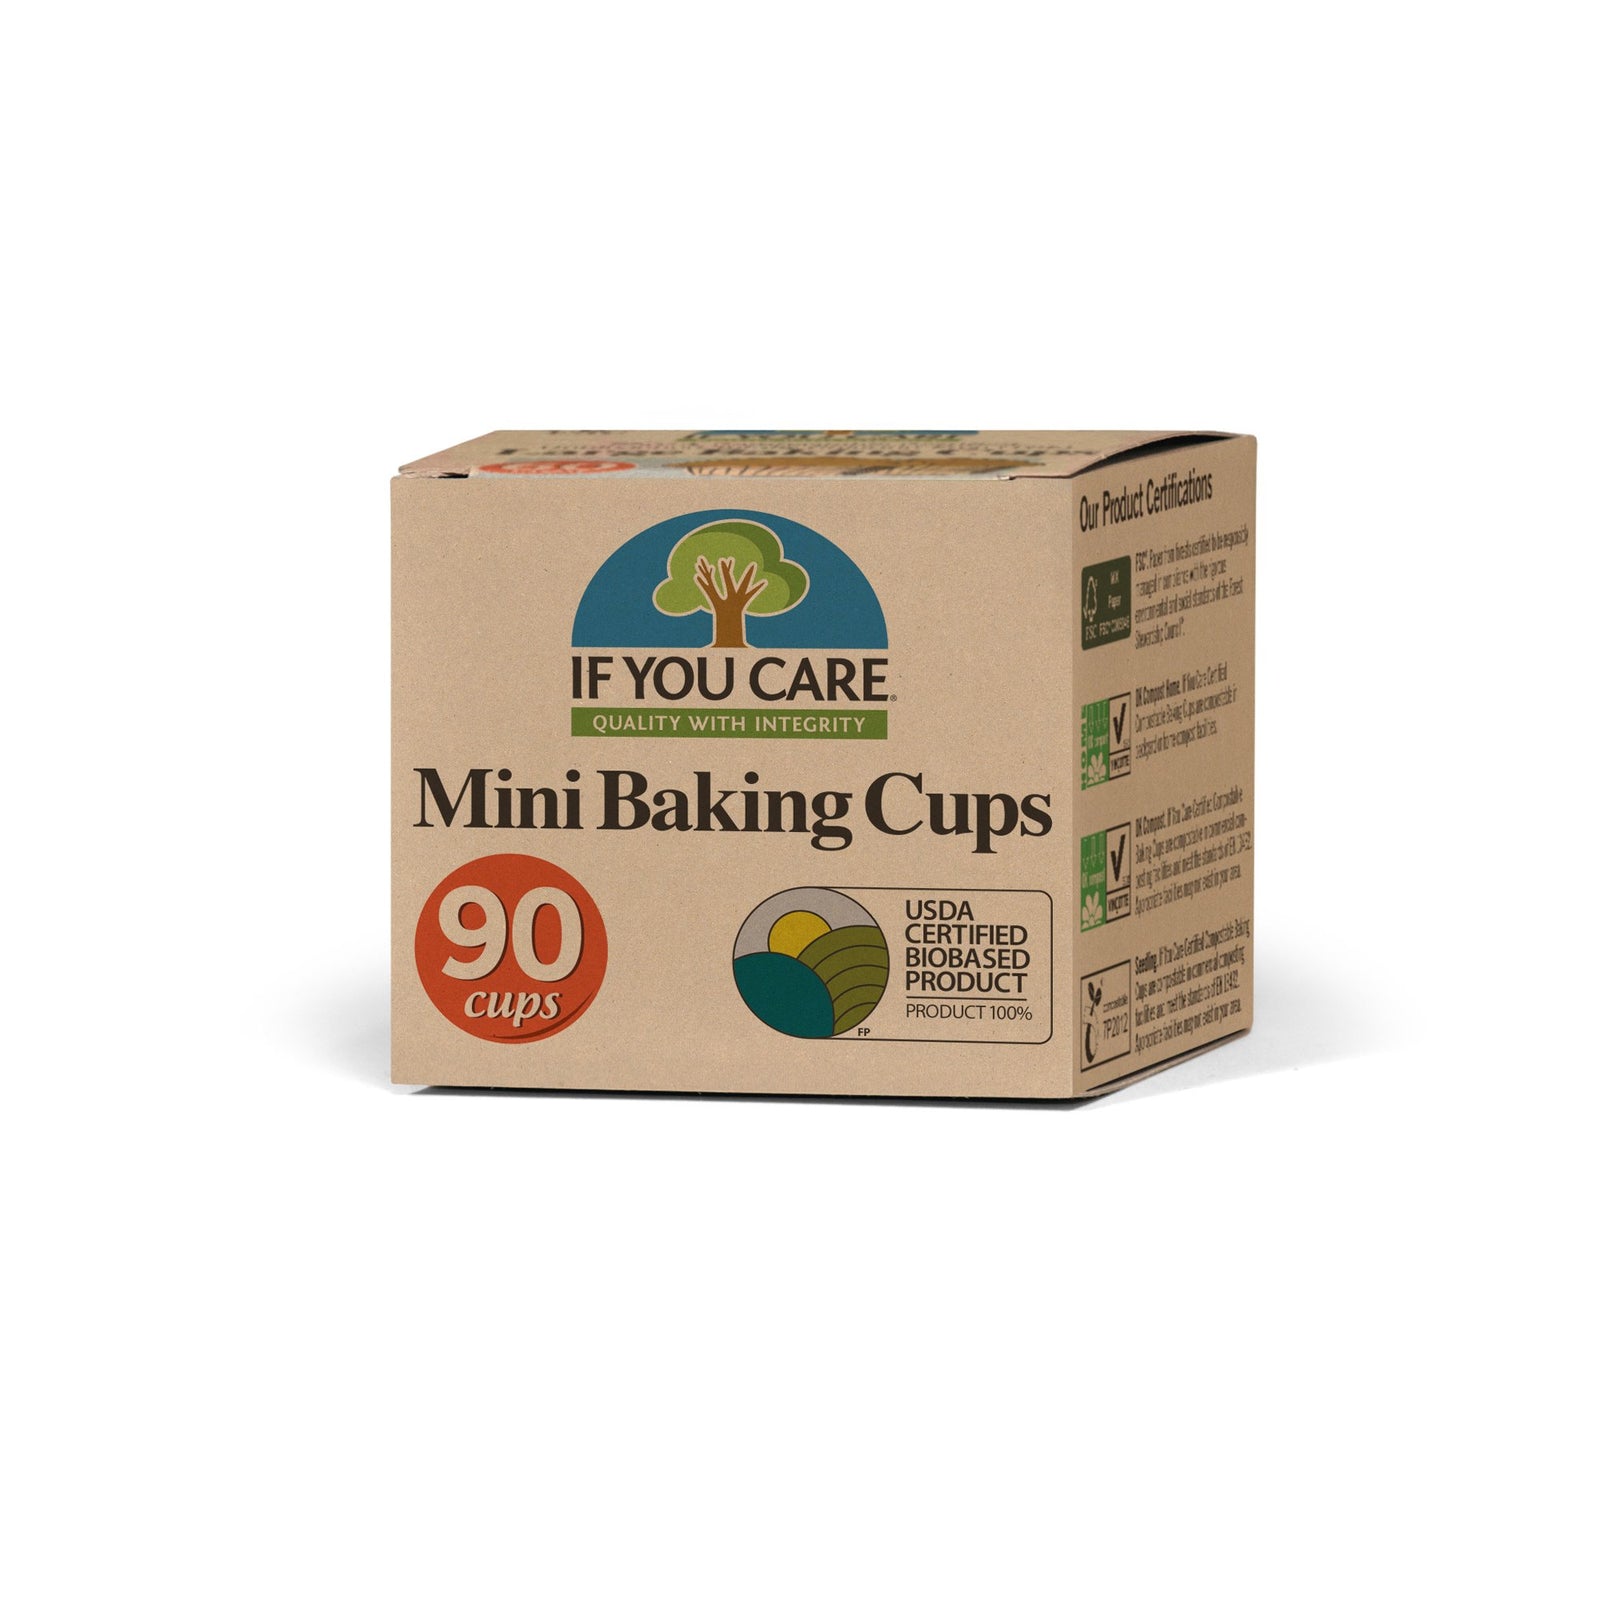 If You Care Unbleached Large Baking Cups, 60 ct - Kroger